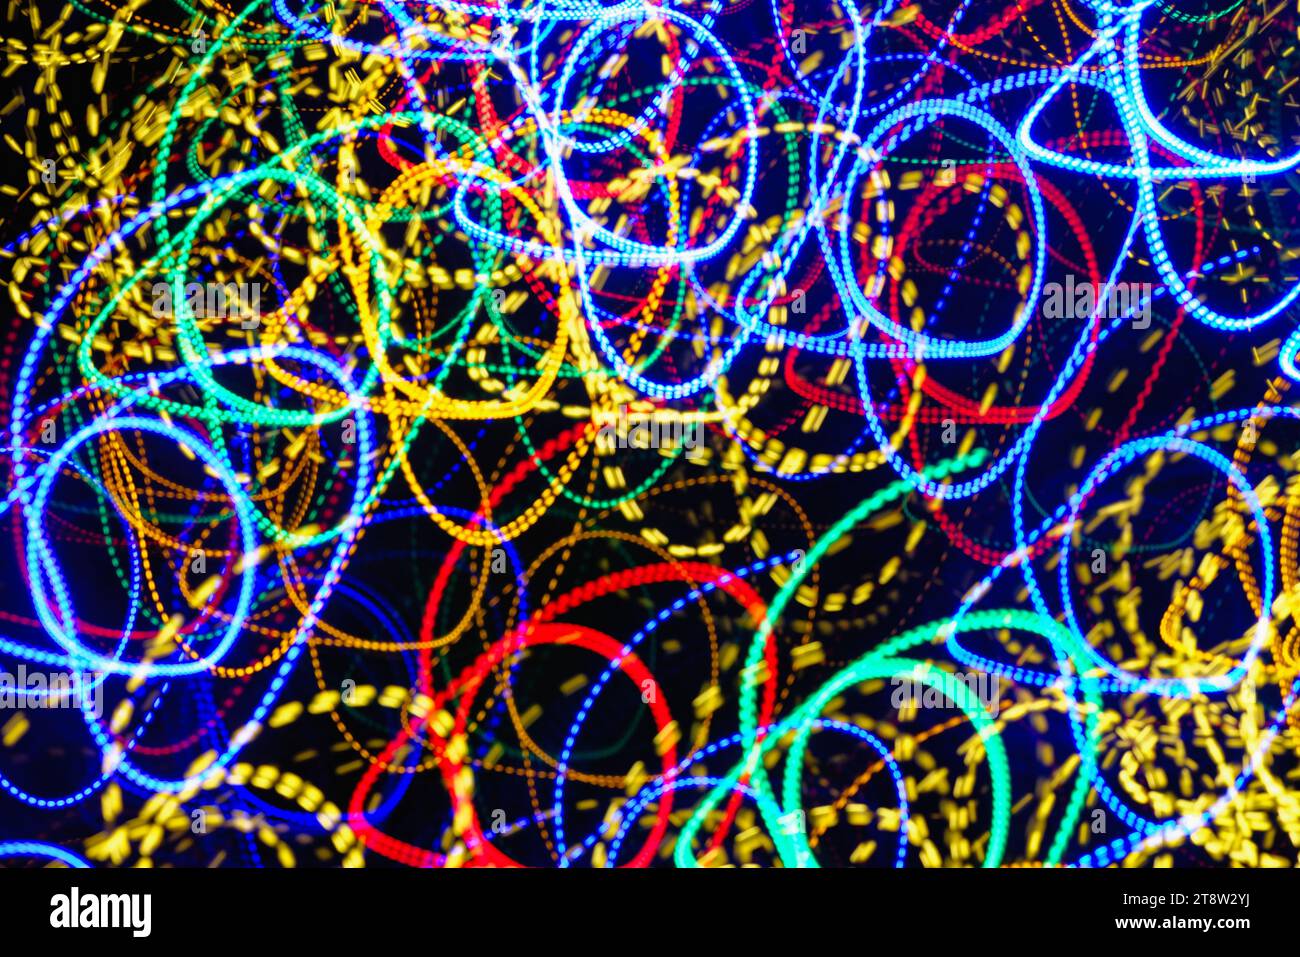 Blurred multi coloured light pattern streaks against a dark background creating abstract shapes Stock Photo